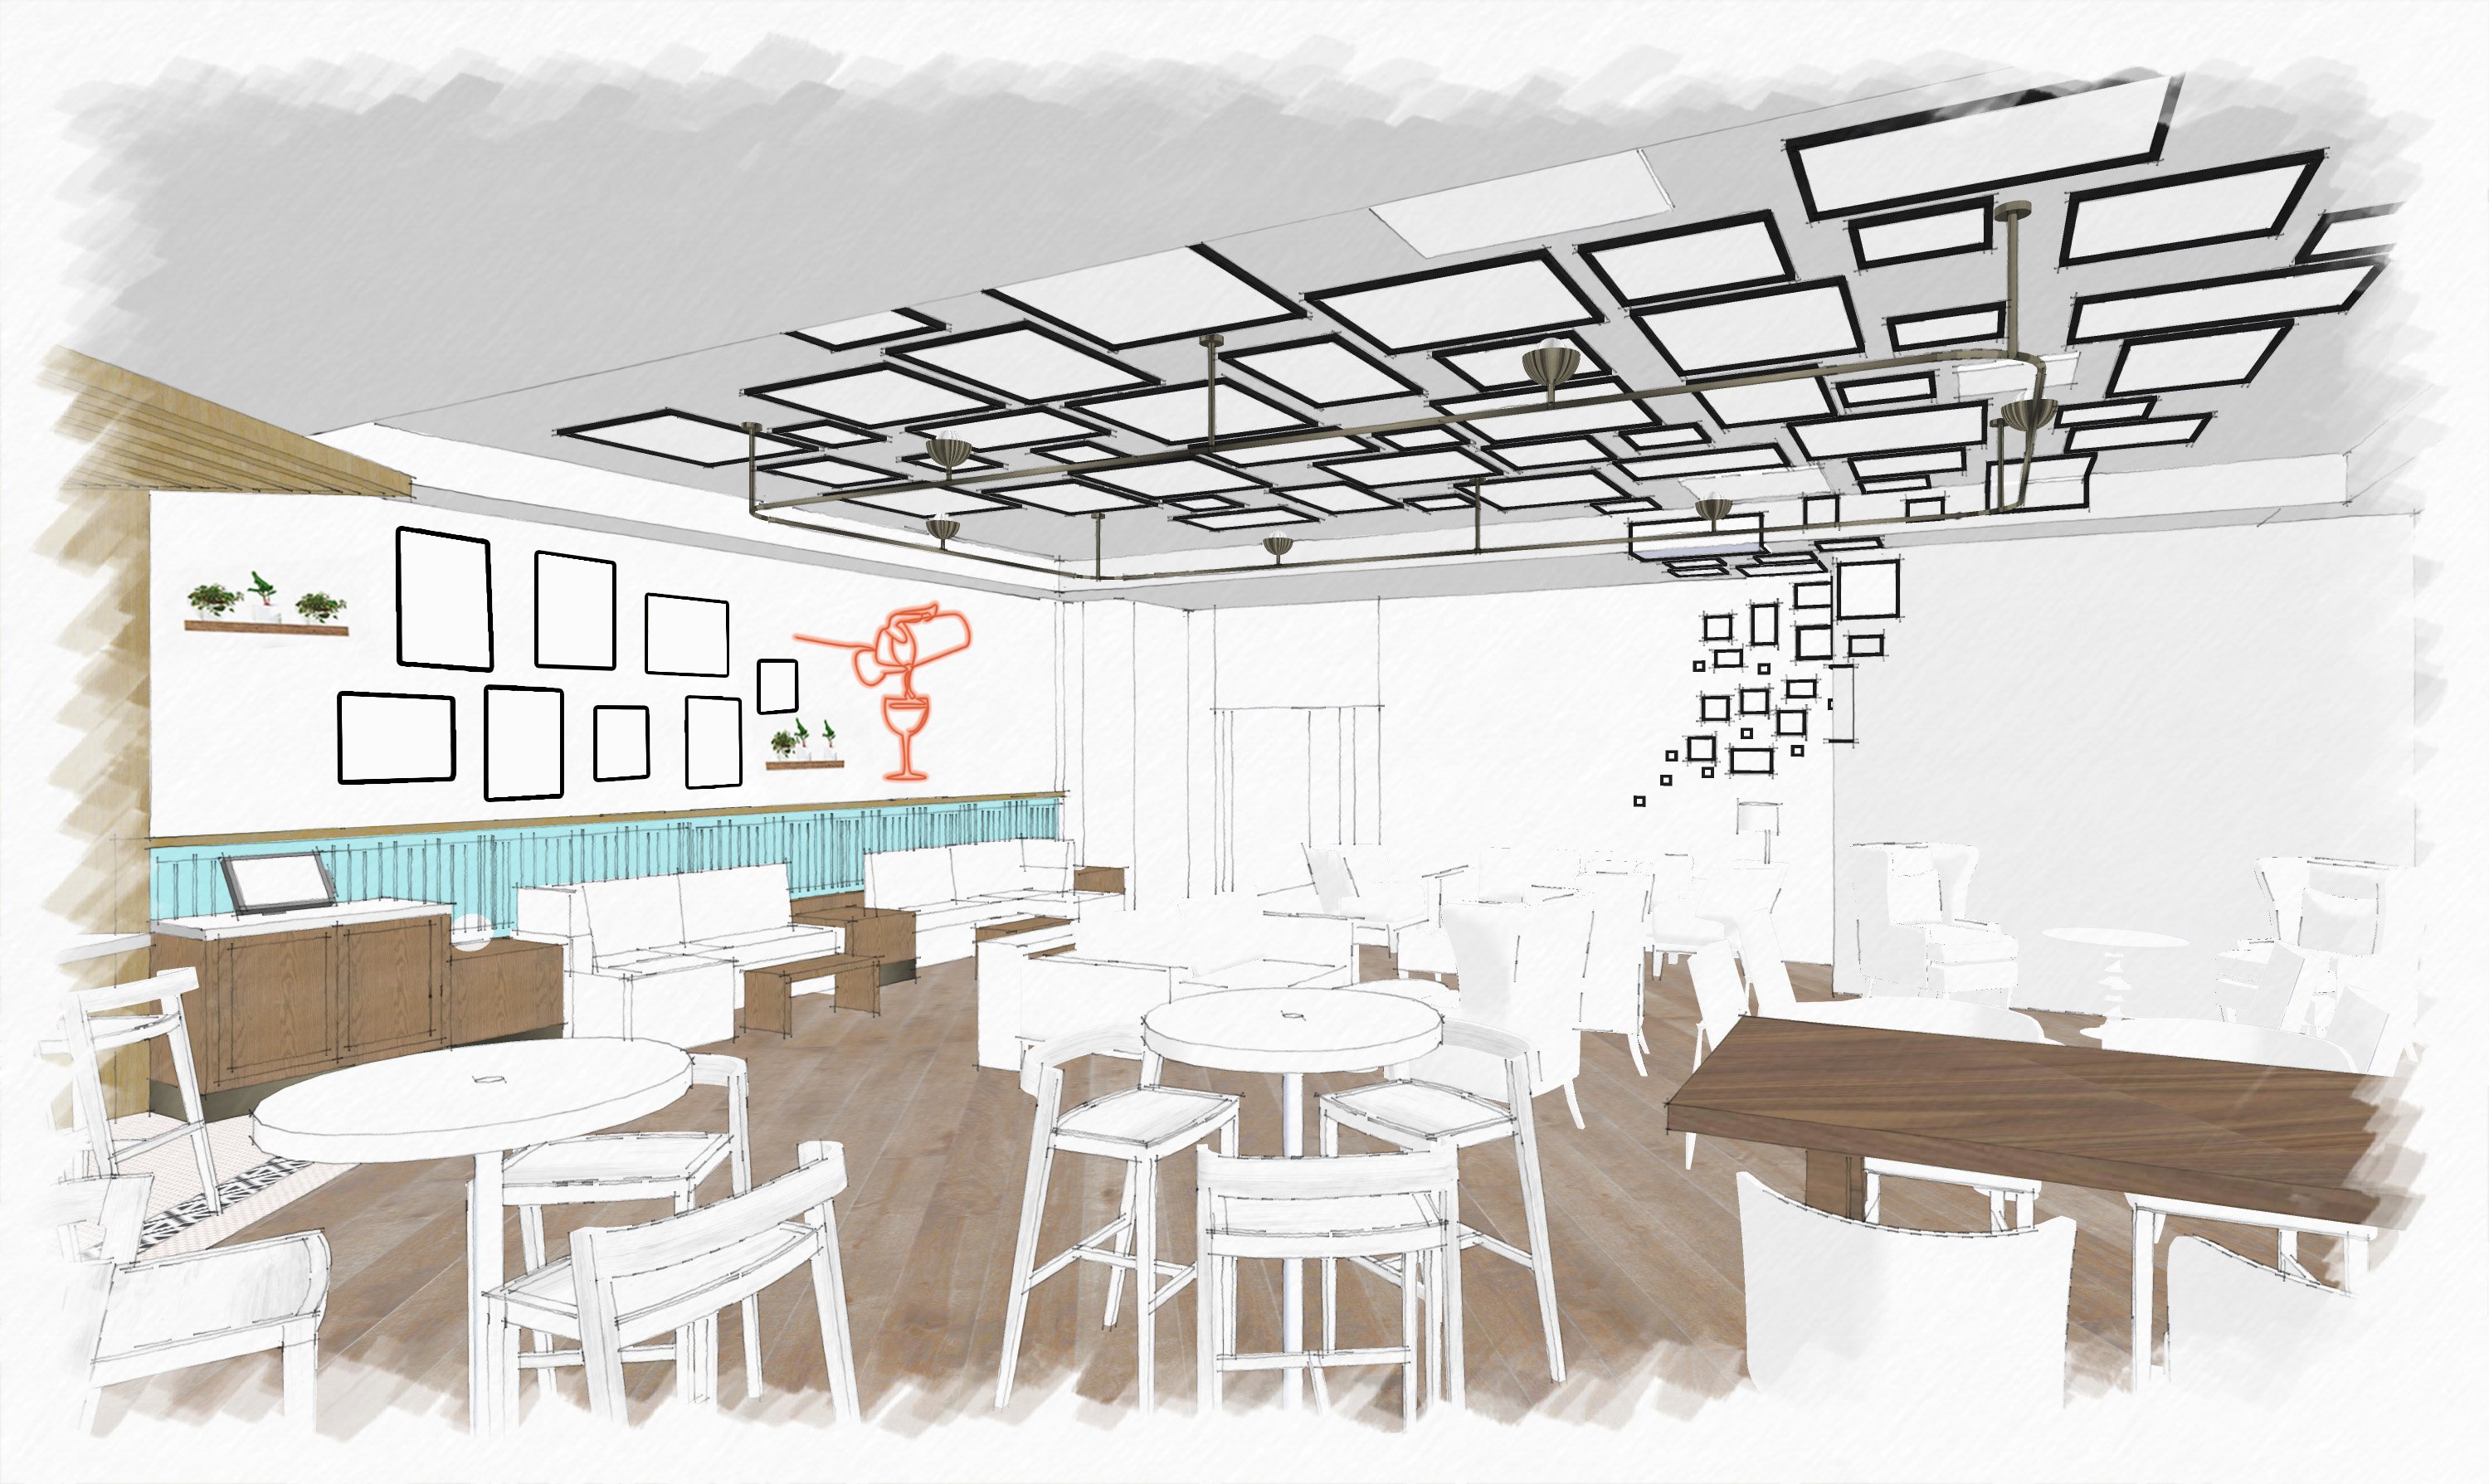 A design rendering of The Commentary’s lounge from July 2019, featuring two large salon-style walls. This was an early image provided to our team pre-curation. Provided by EDG Interior Architecture + Design.